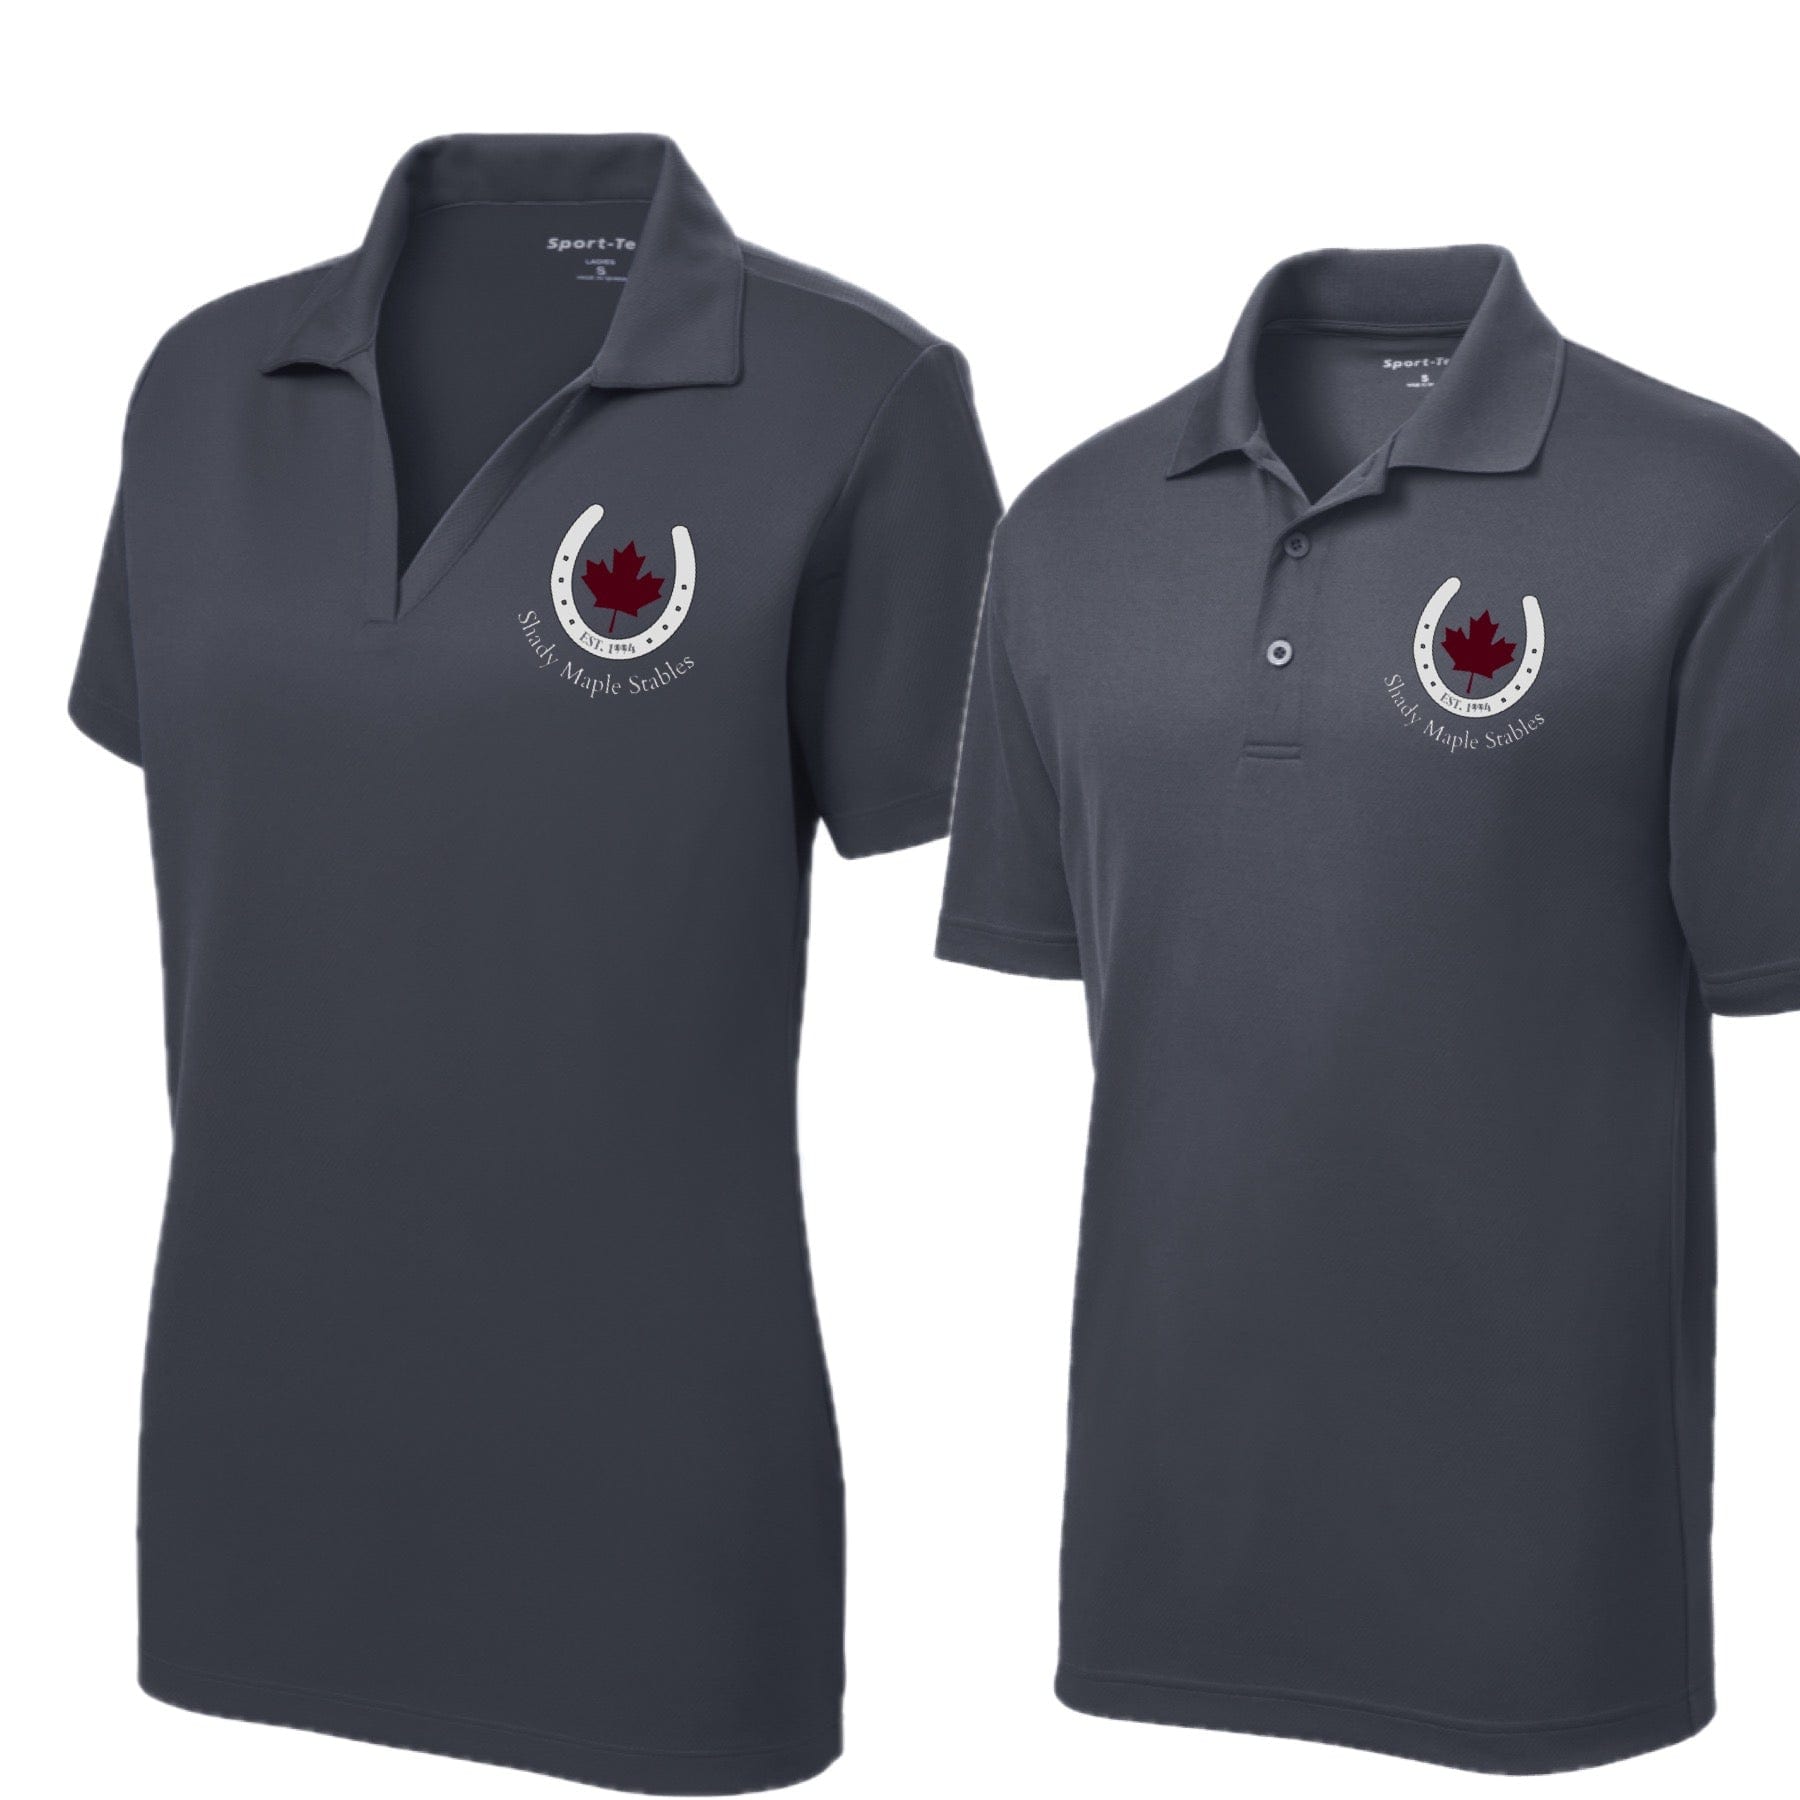 Equestrian Team Apparel Shady Maple Stables Polo Shirt equestrian team apparel online tack store mobile tack store custom farm apparel custom show stable clothing equestrian lifestyle horse show clothing riding clothes horses equestrian tack store